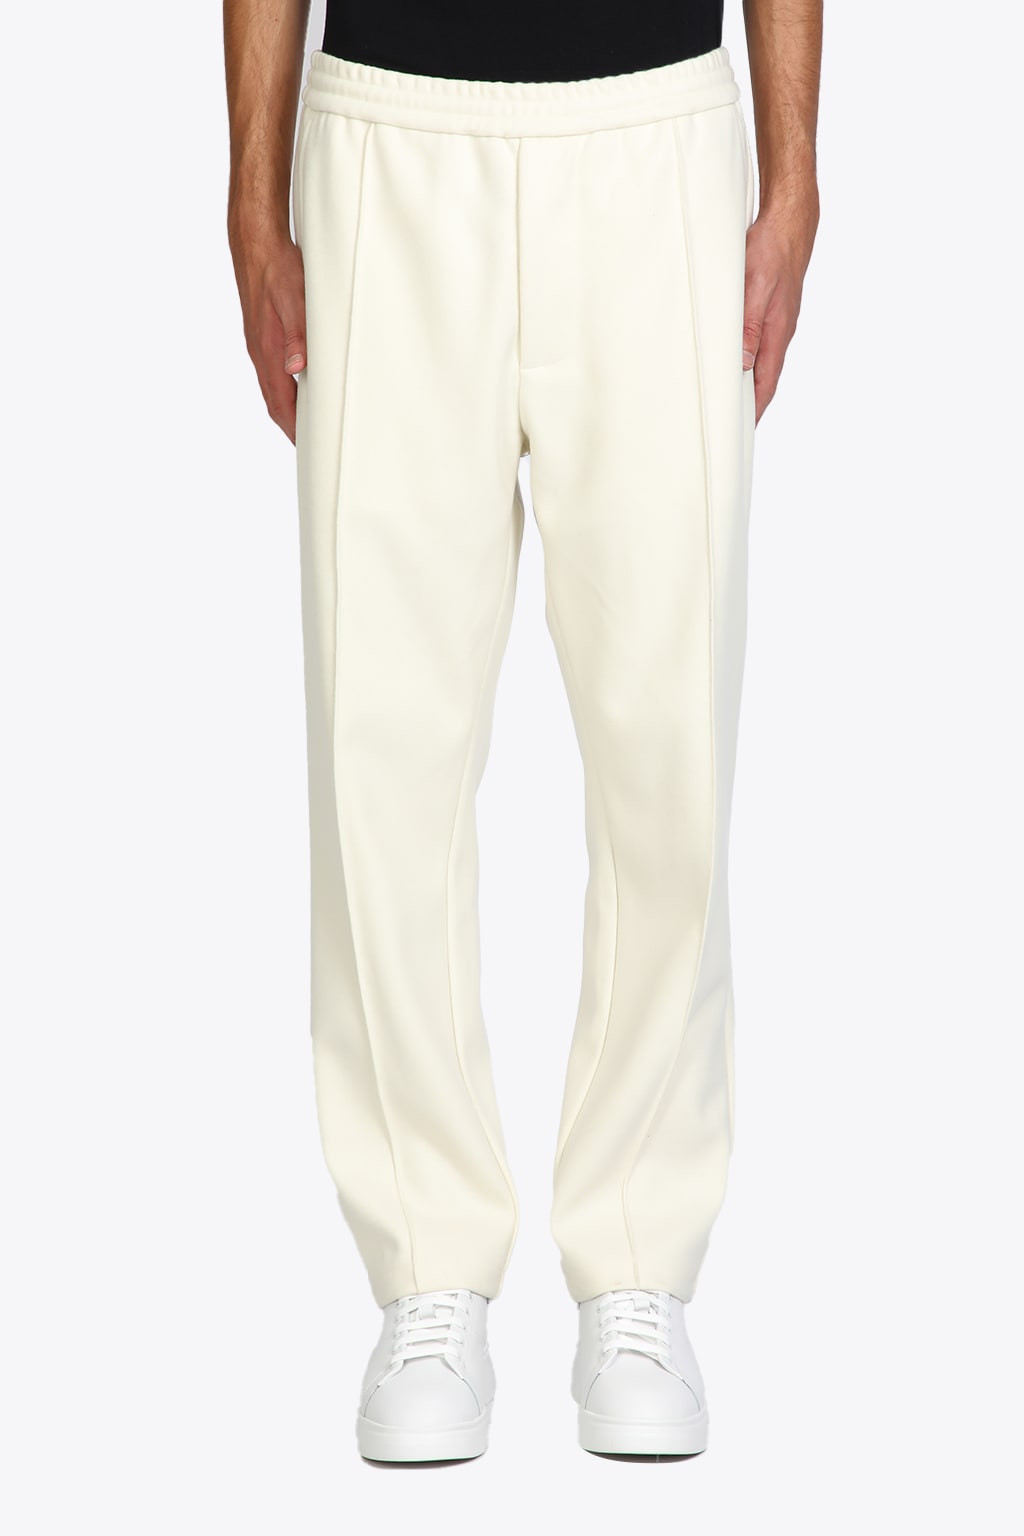 Emporio Armani Trouser Off-white wool blend swetpant.